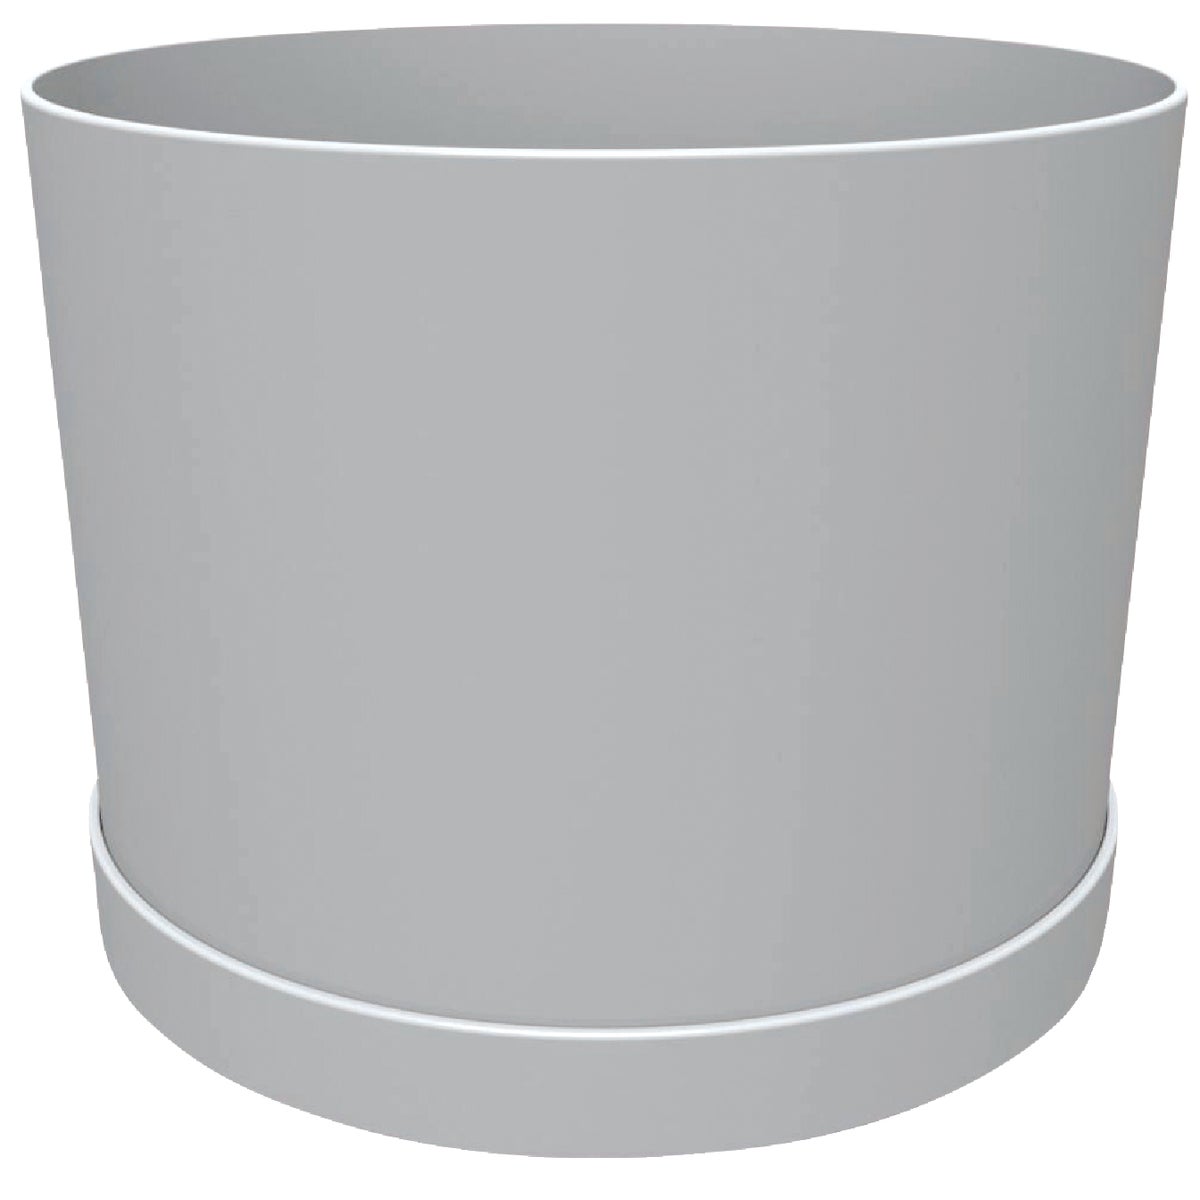 Bloem Mathers Collection 6 In. Cement Plastic Planter